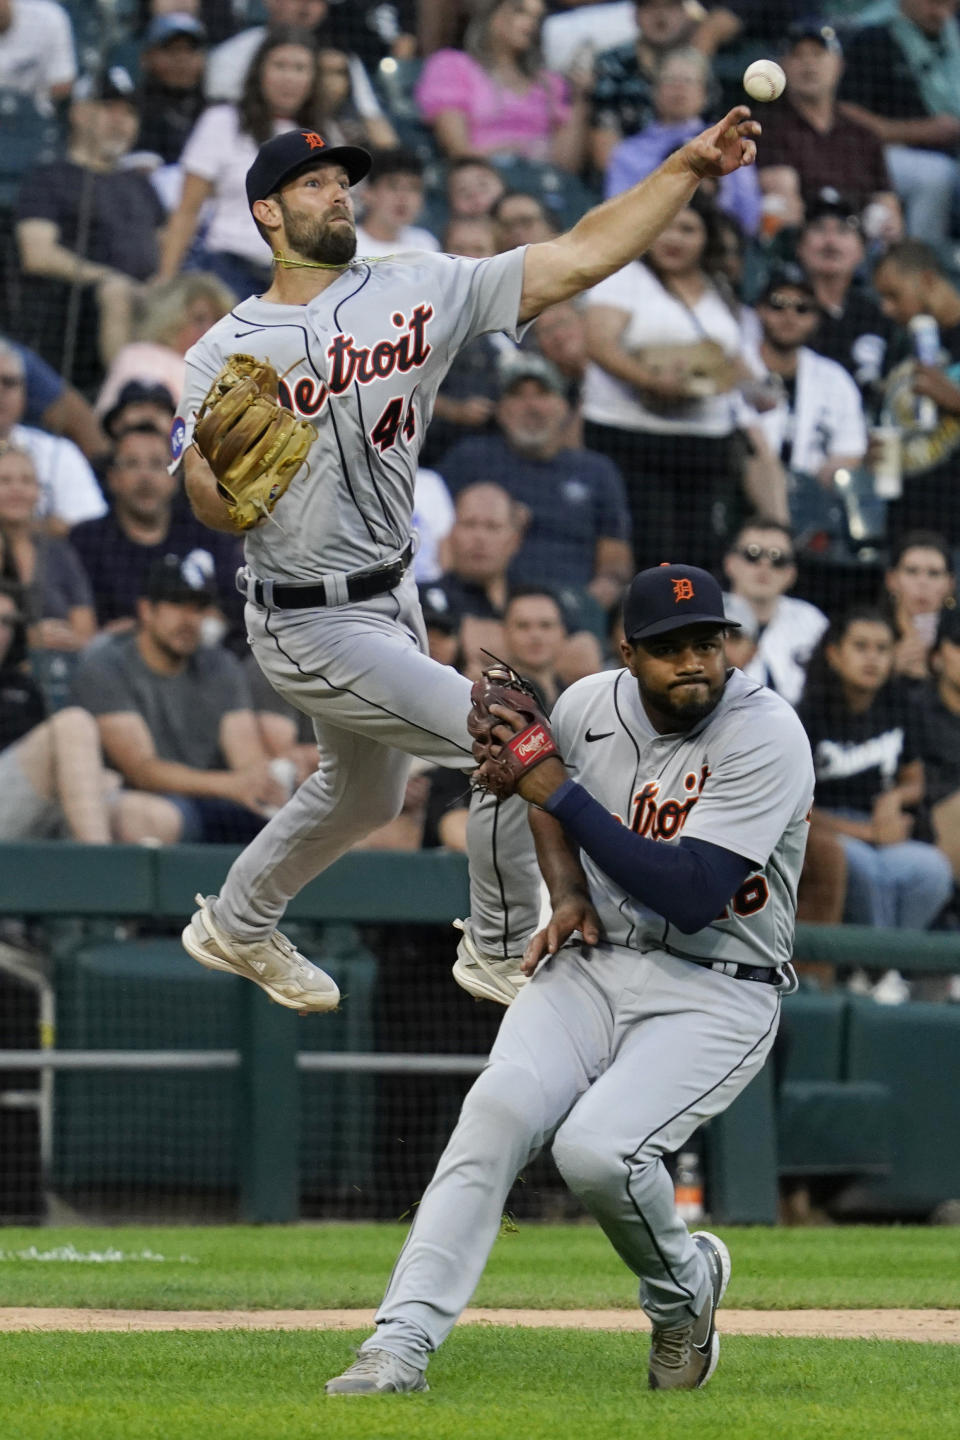 Detroit Tigers starting pitcher Daniel Norris throws to first base as third baseman Jeimer Candelario ducks, on a single by Chicago White Sox's Eloy Jimenez during the fourth inning of a baseball game in Chicago, Friday, Aug. 12, 2022. (AP Photo/Nam Y. Huh)